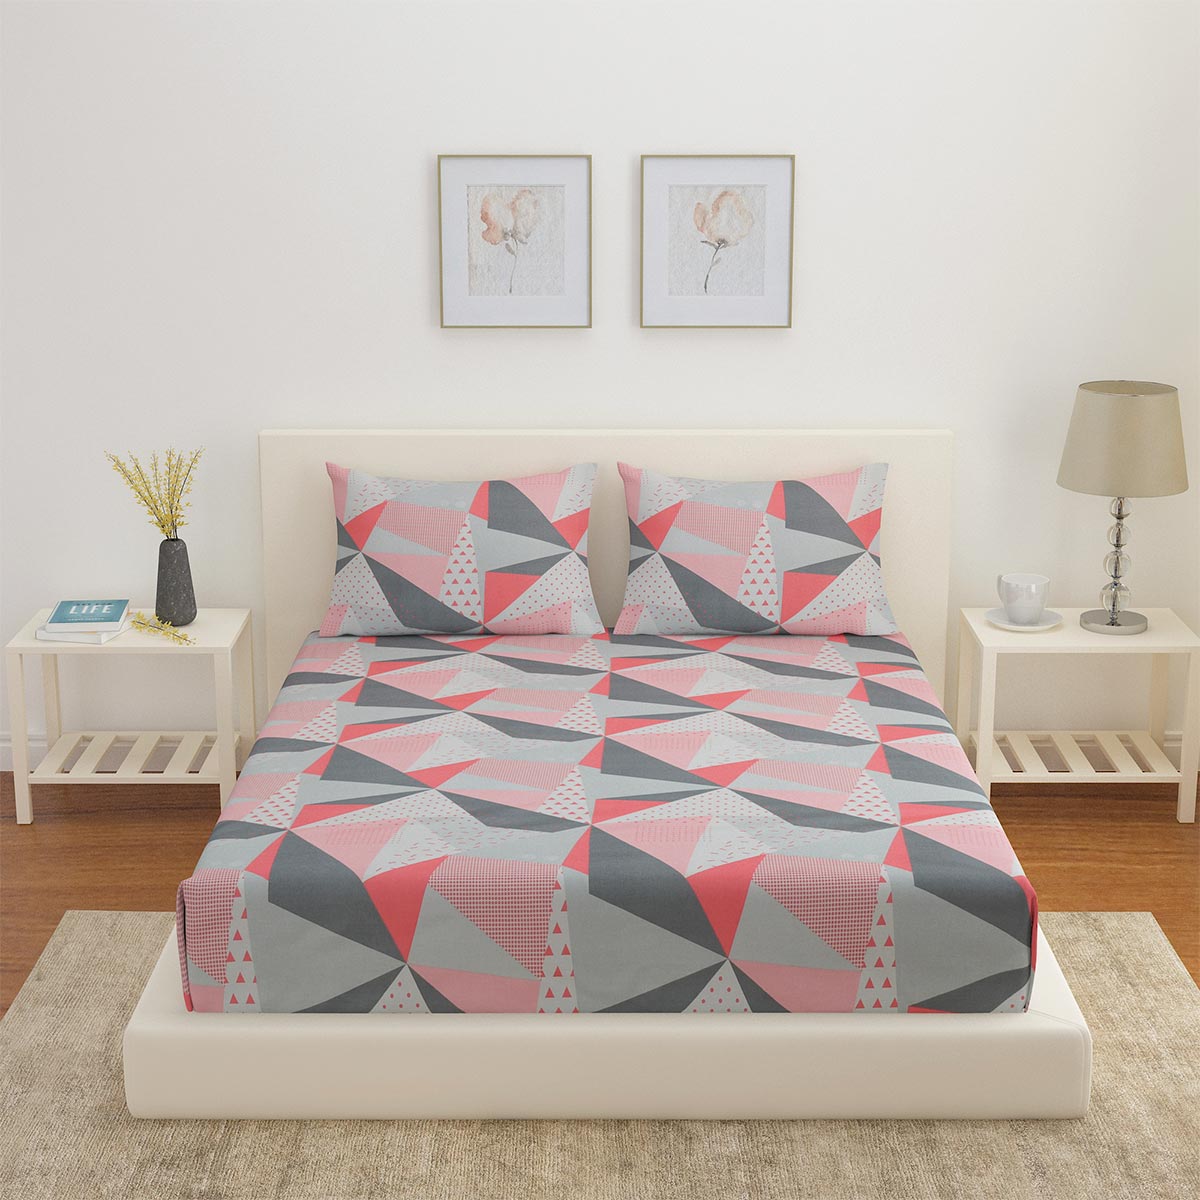 Arias by Lara Dutta Geometric Cotton King Bedsheet With 2 Pillow Covers (Grey)